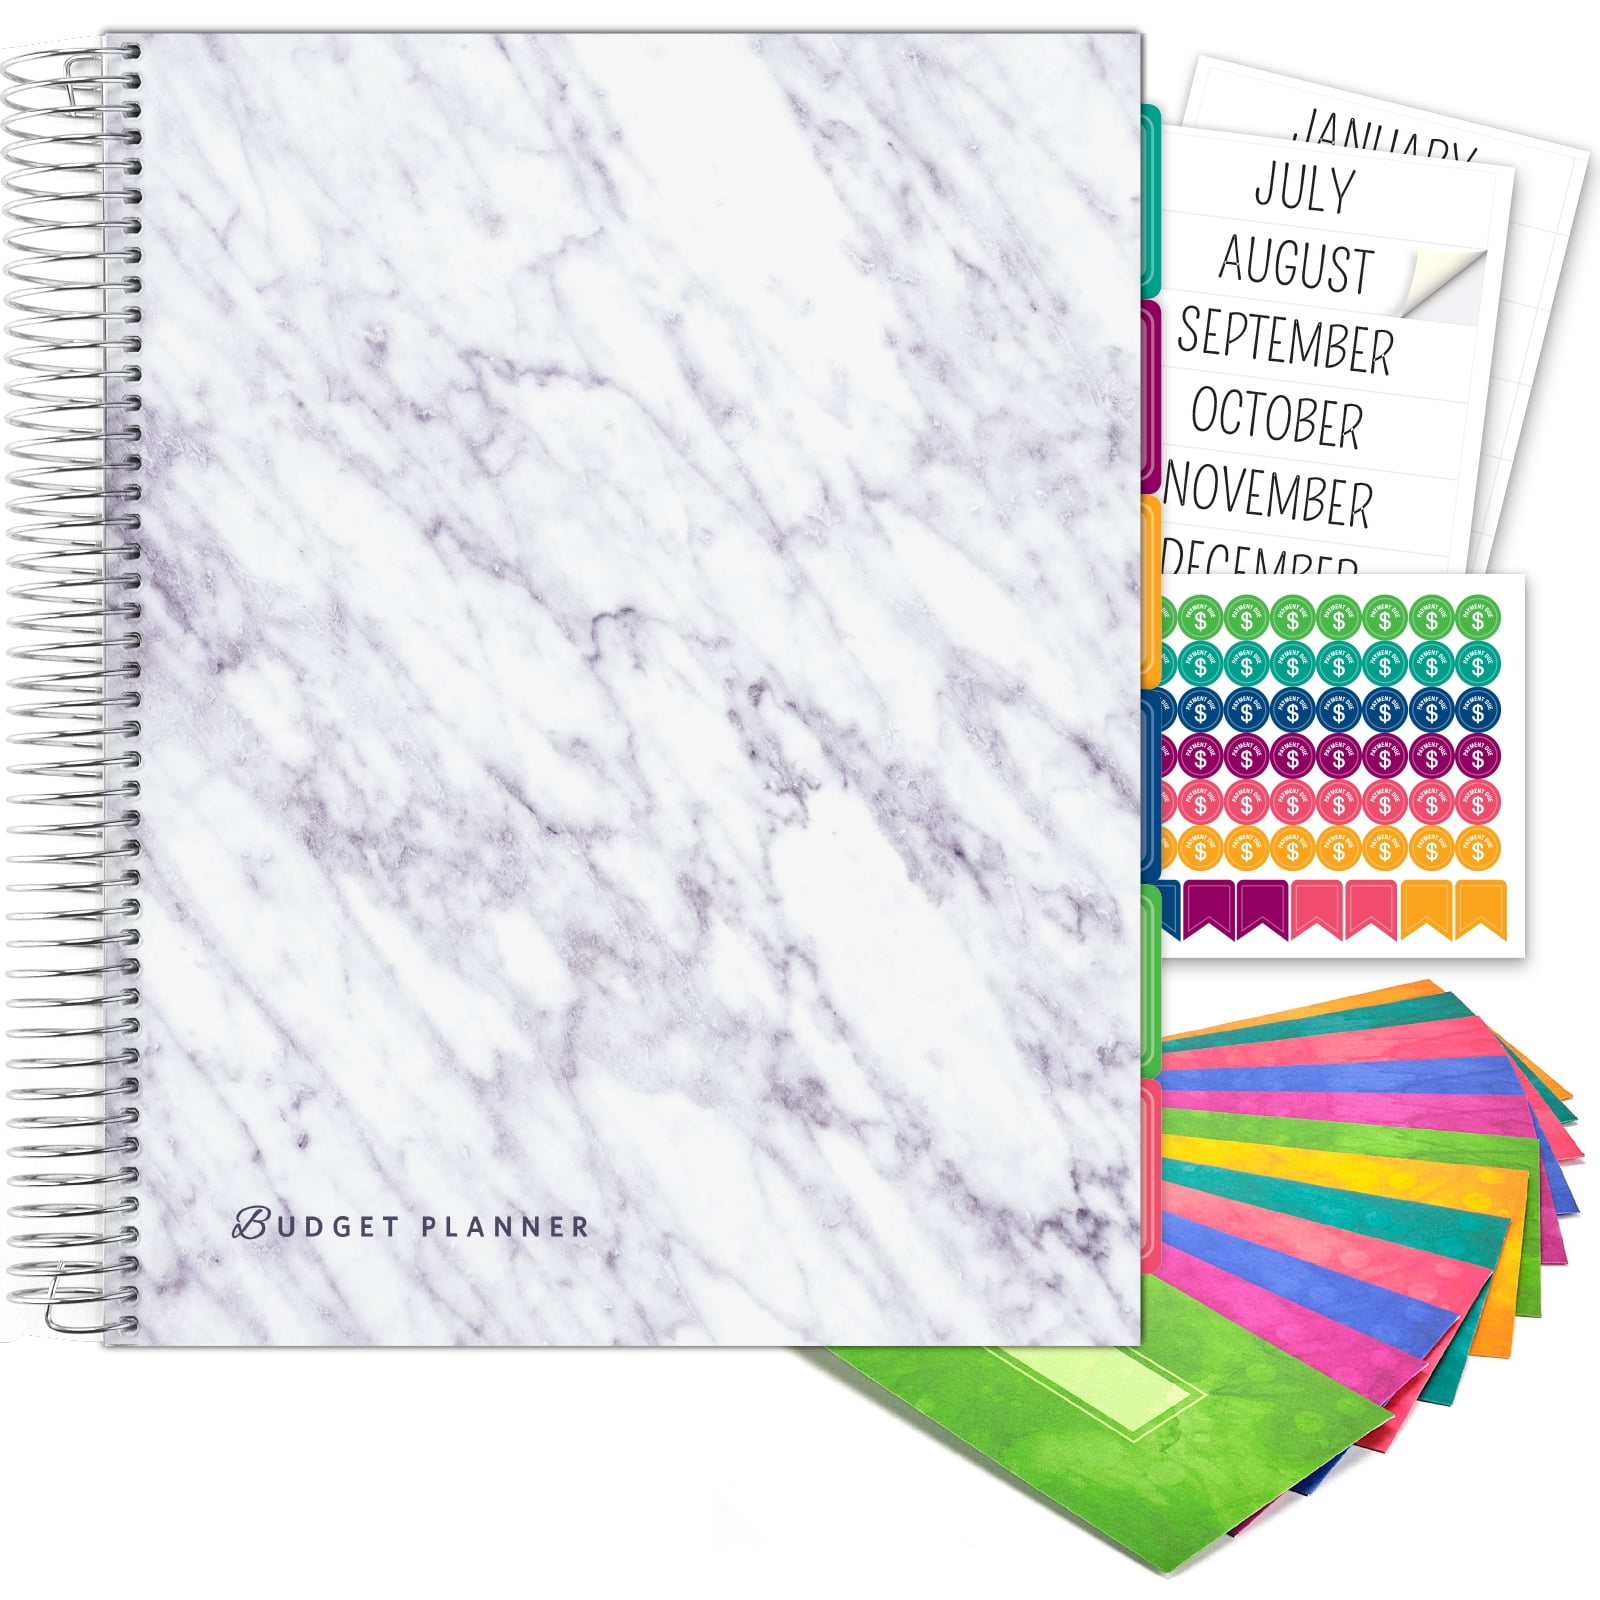 Home Finance & Bill Organizer with Pockets Green With White Marble 